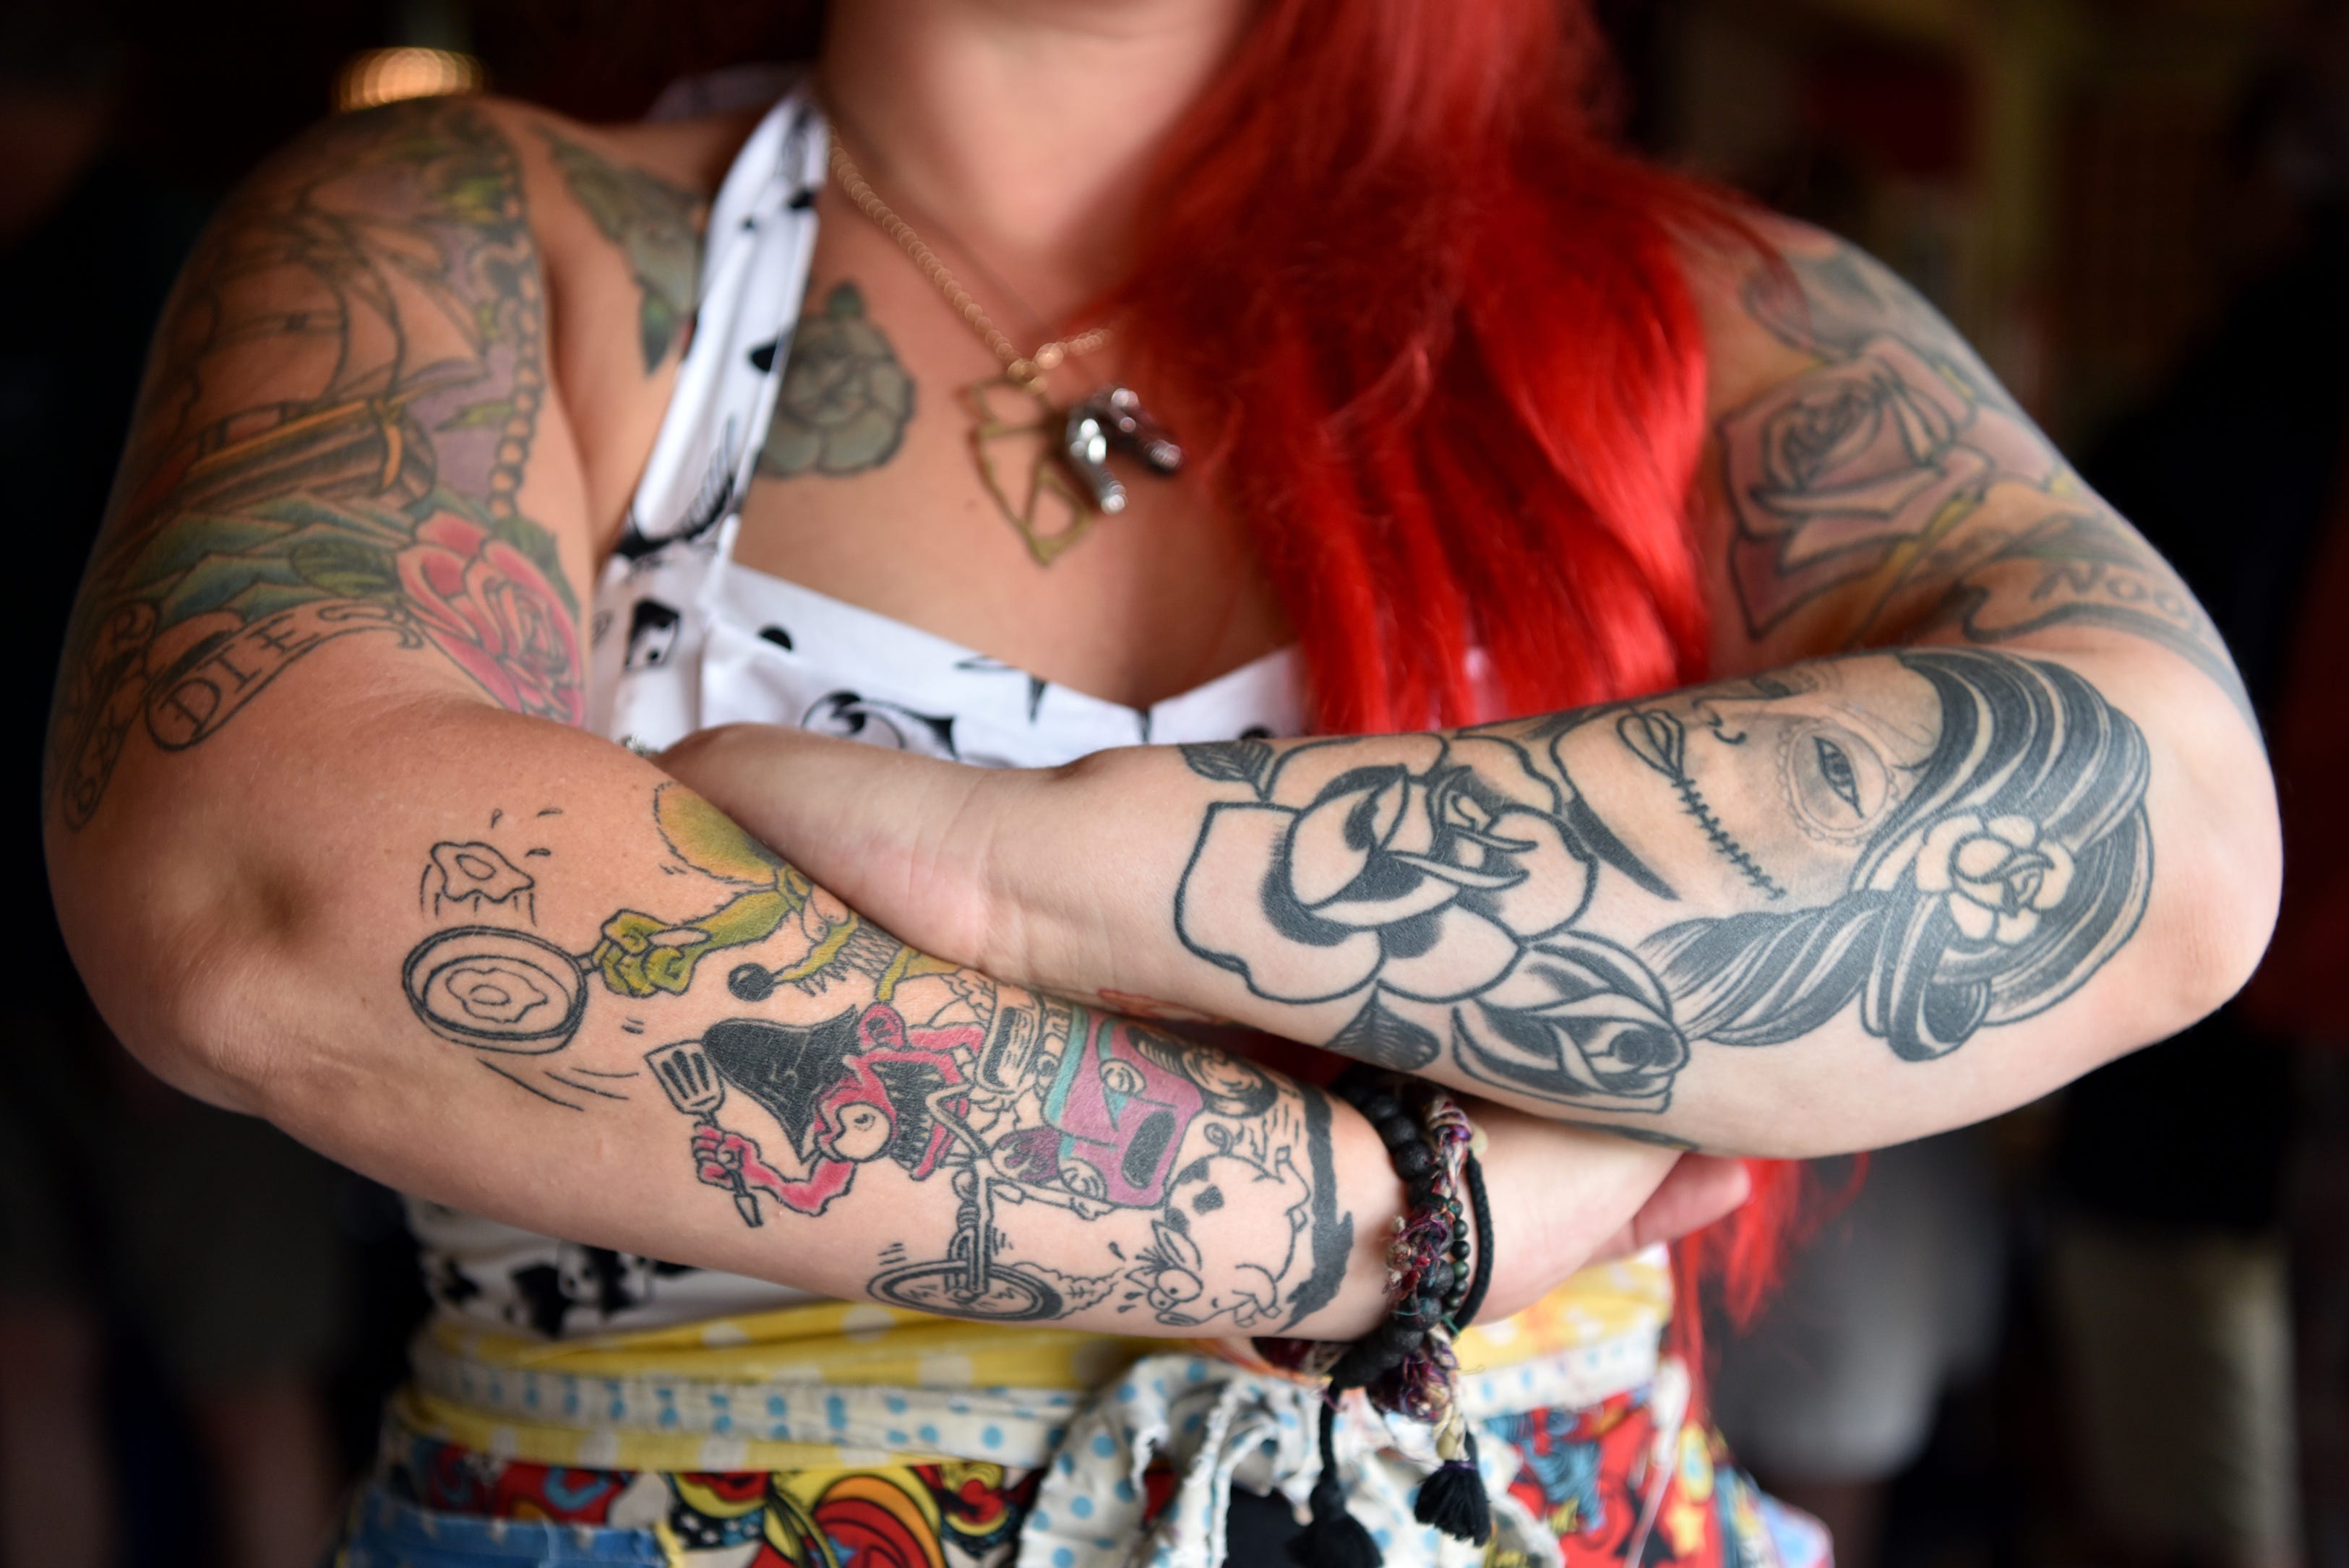 A knife, a fork and tattoos: North Jersey chefs and their inked bodies